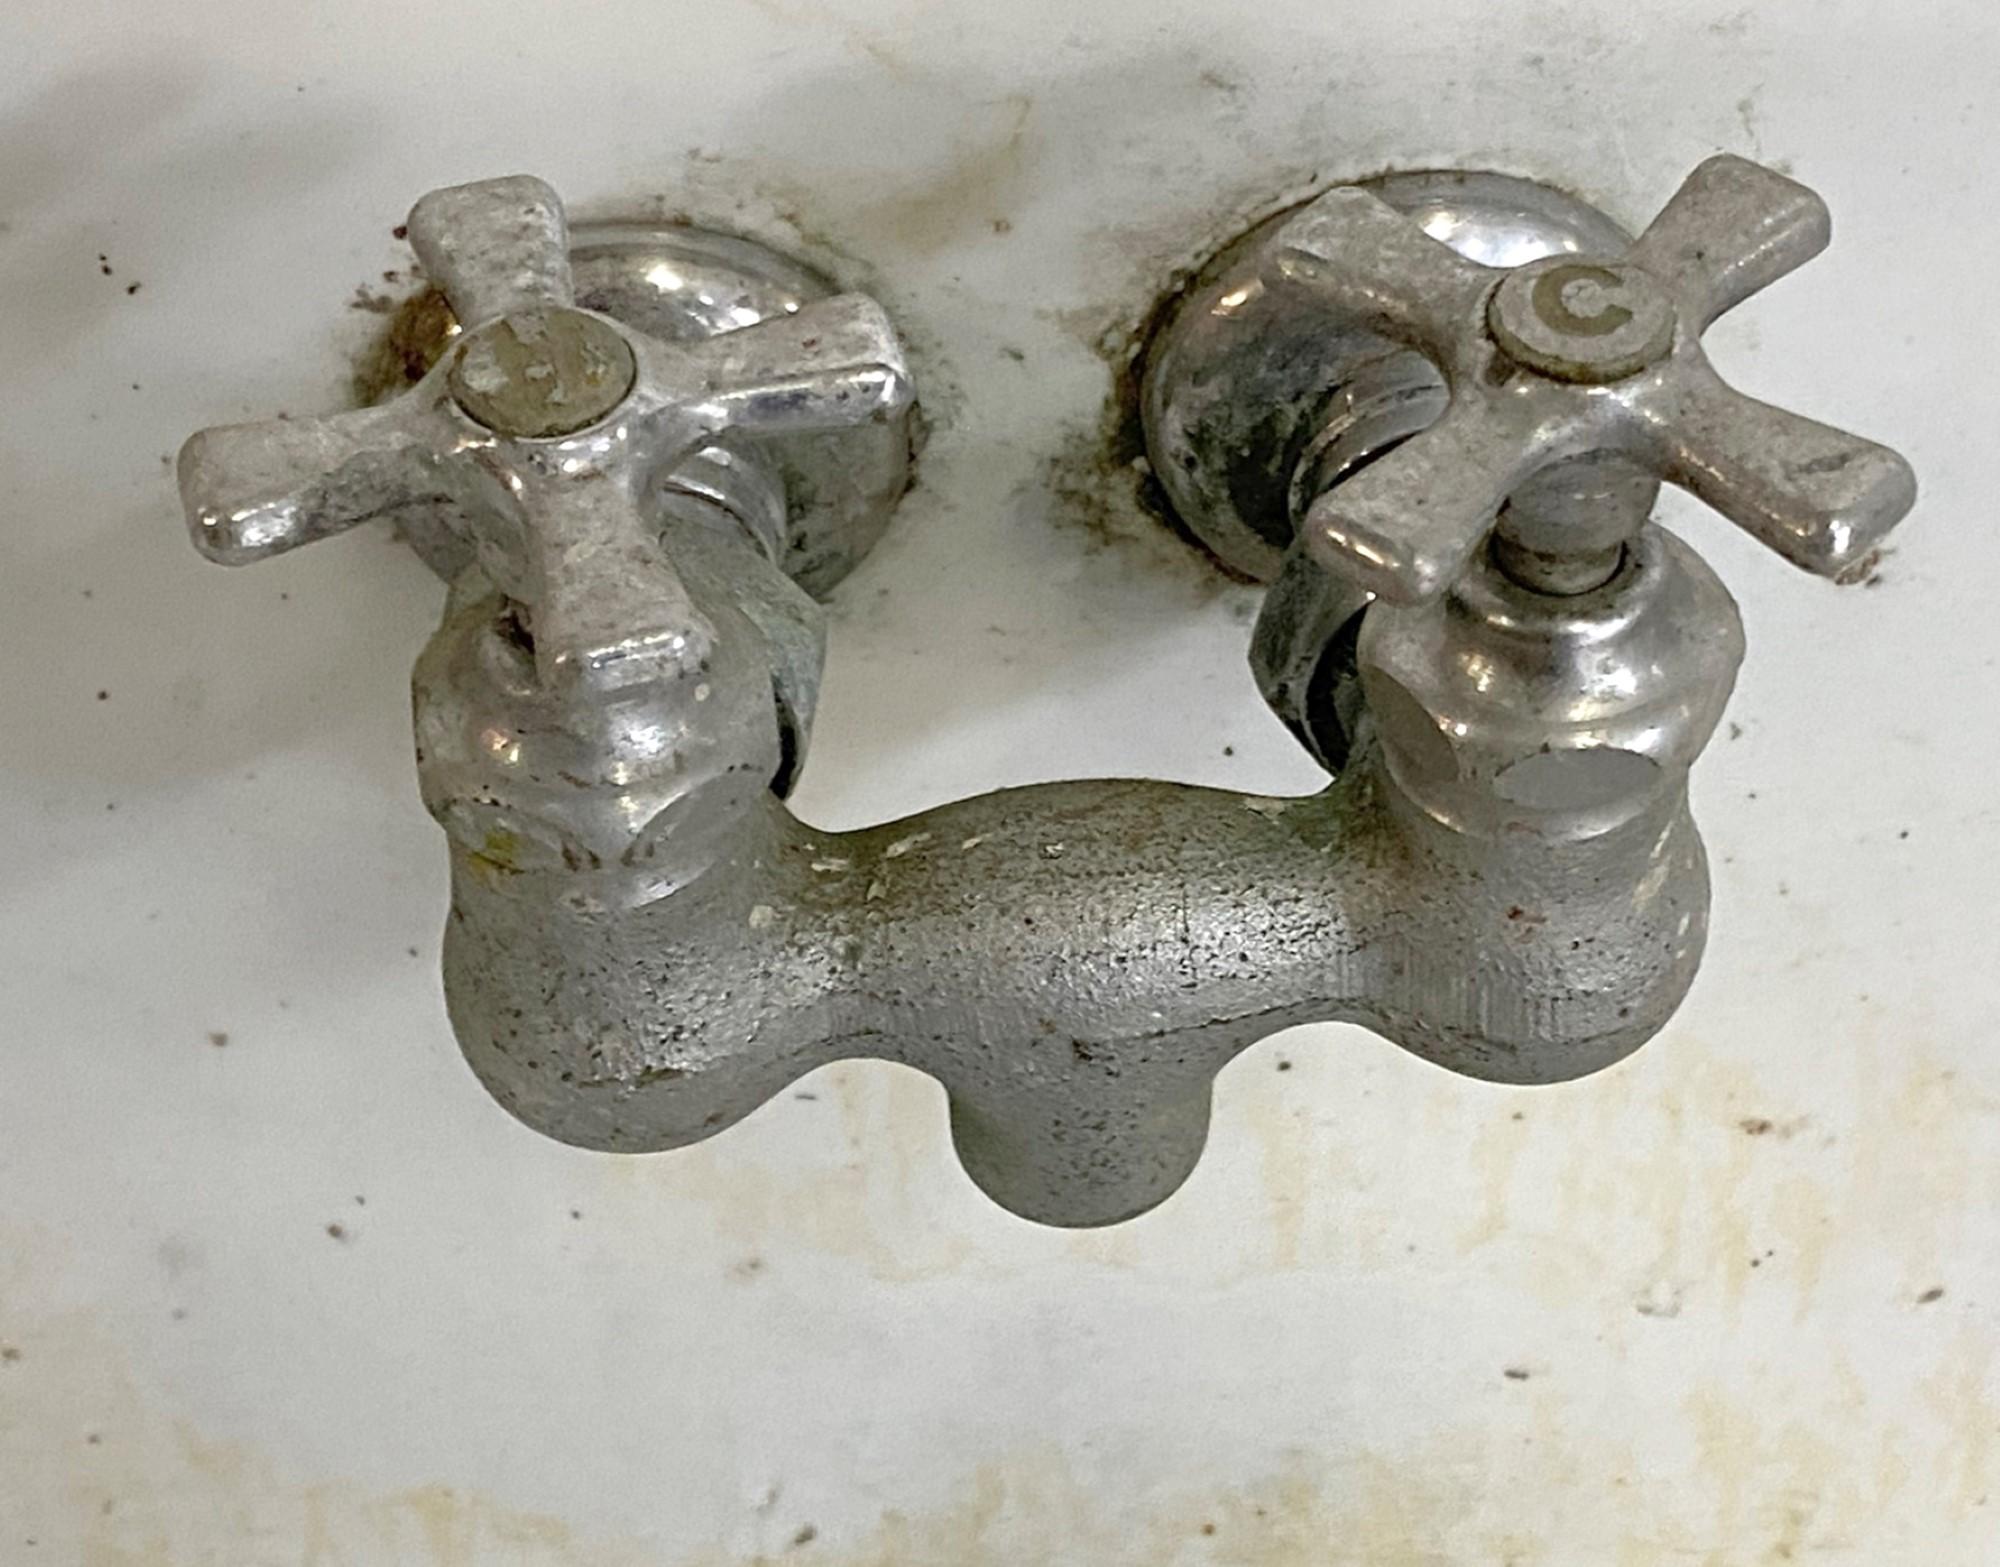 North American 1910s Trough Gang Farmhouse or Work Room Sink with Original Nickel Faucets